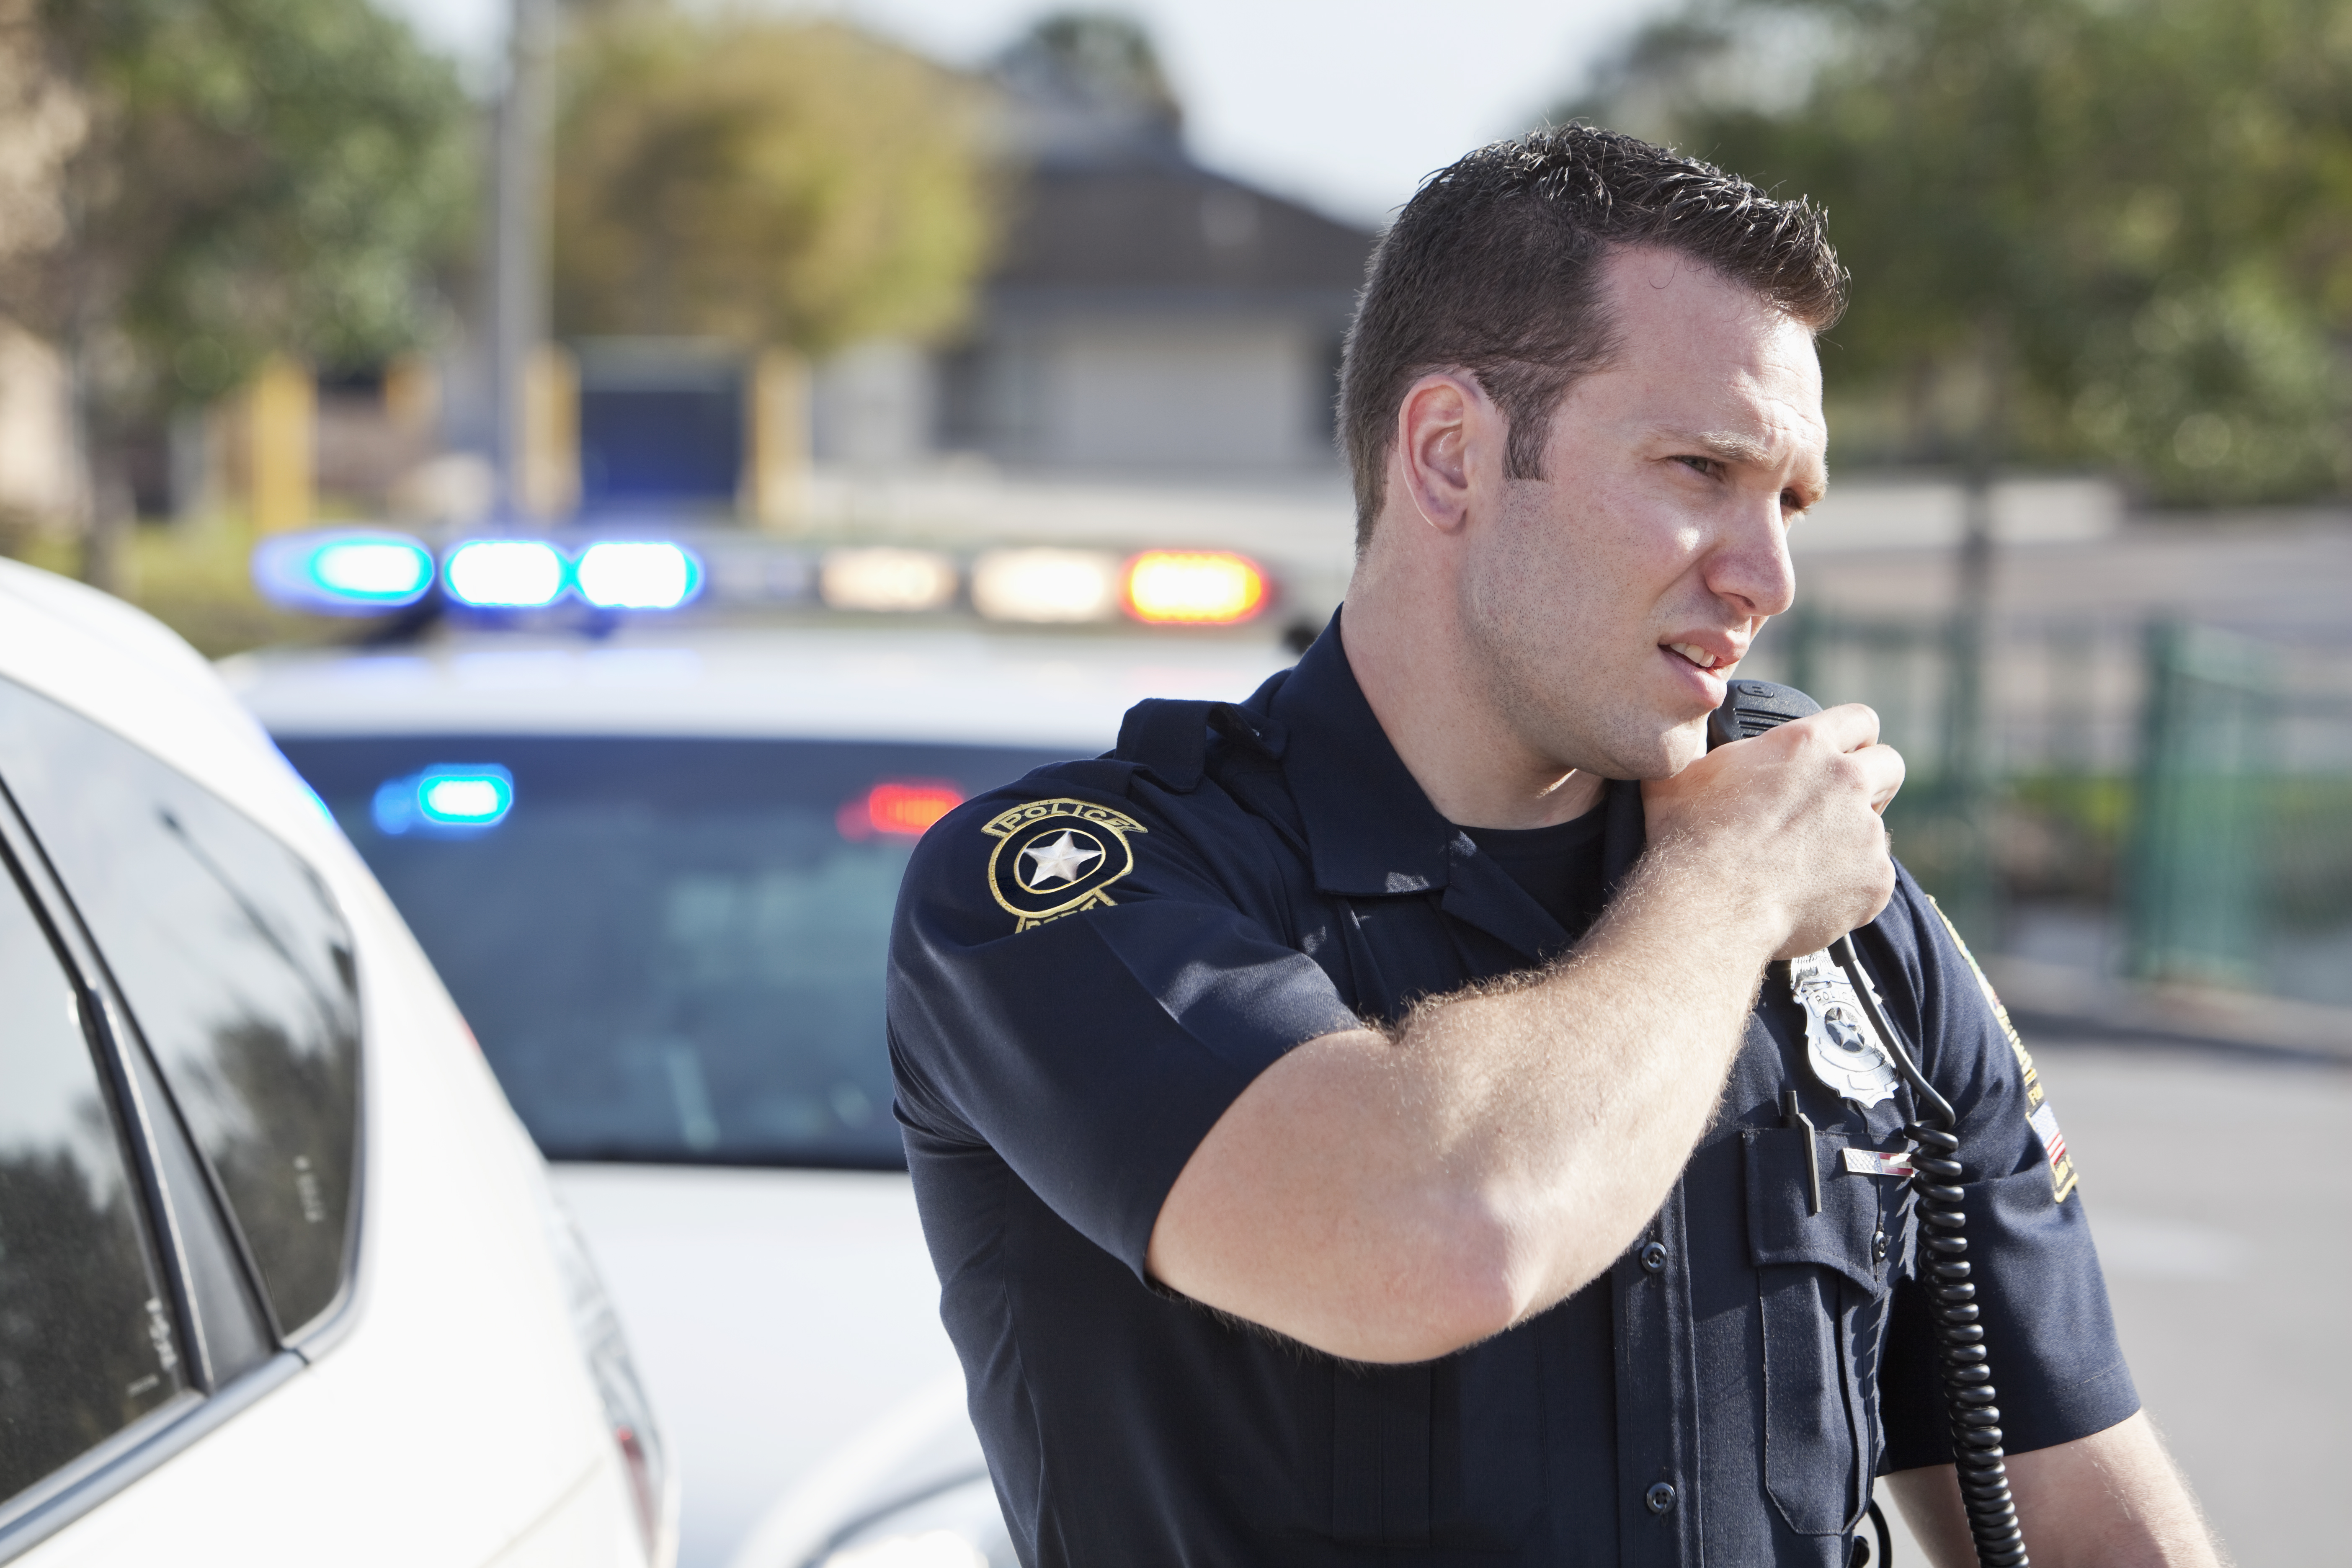 A male police officer standing outdoors, reaching for a radio.